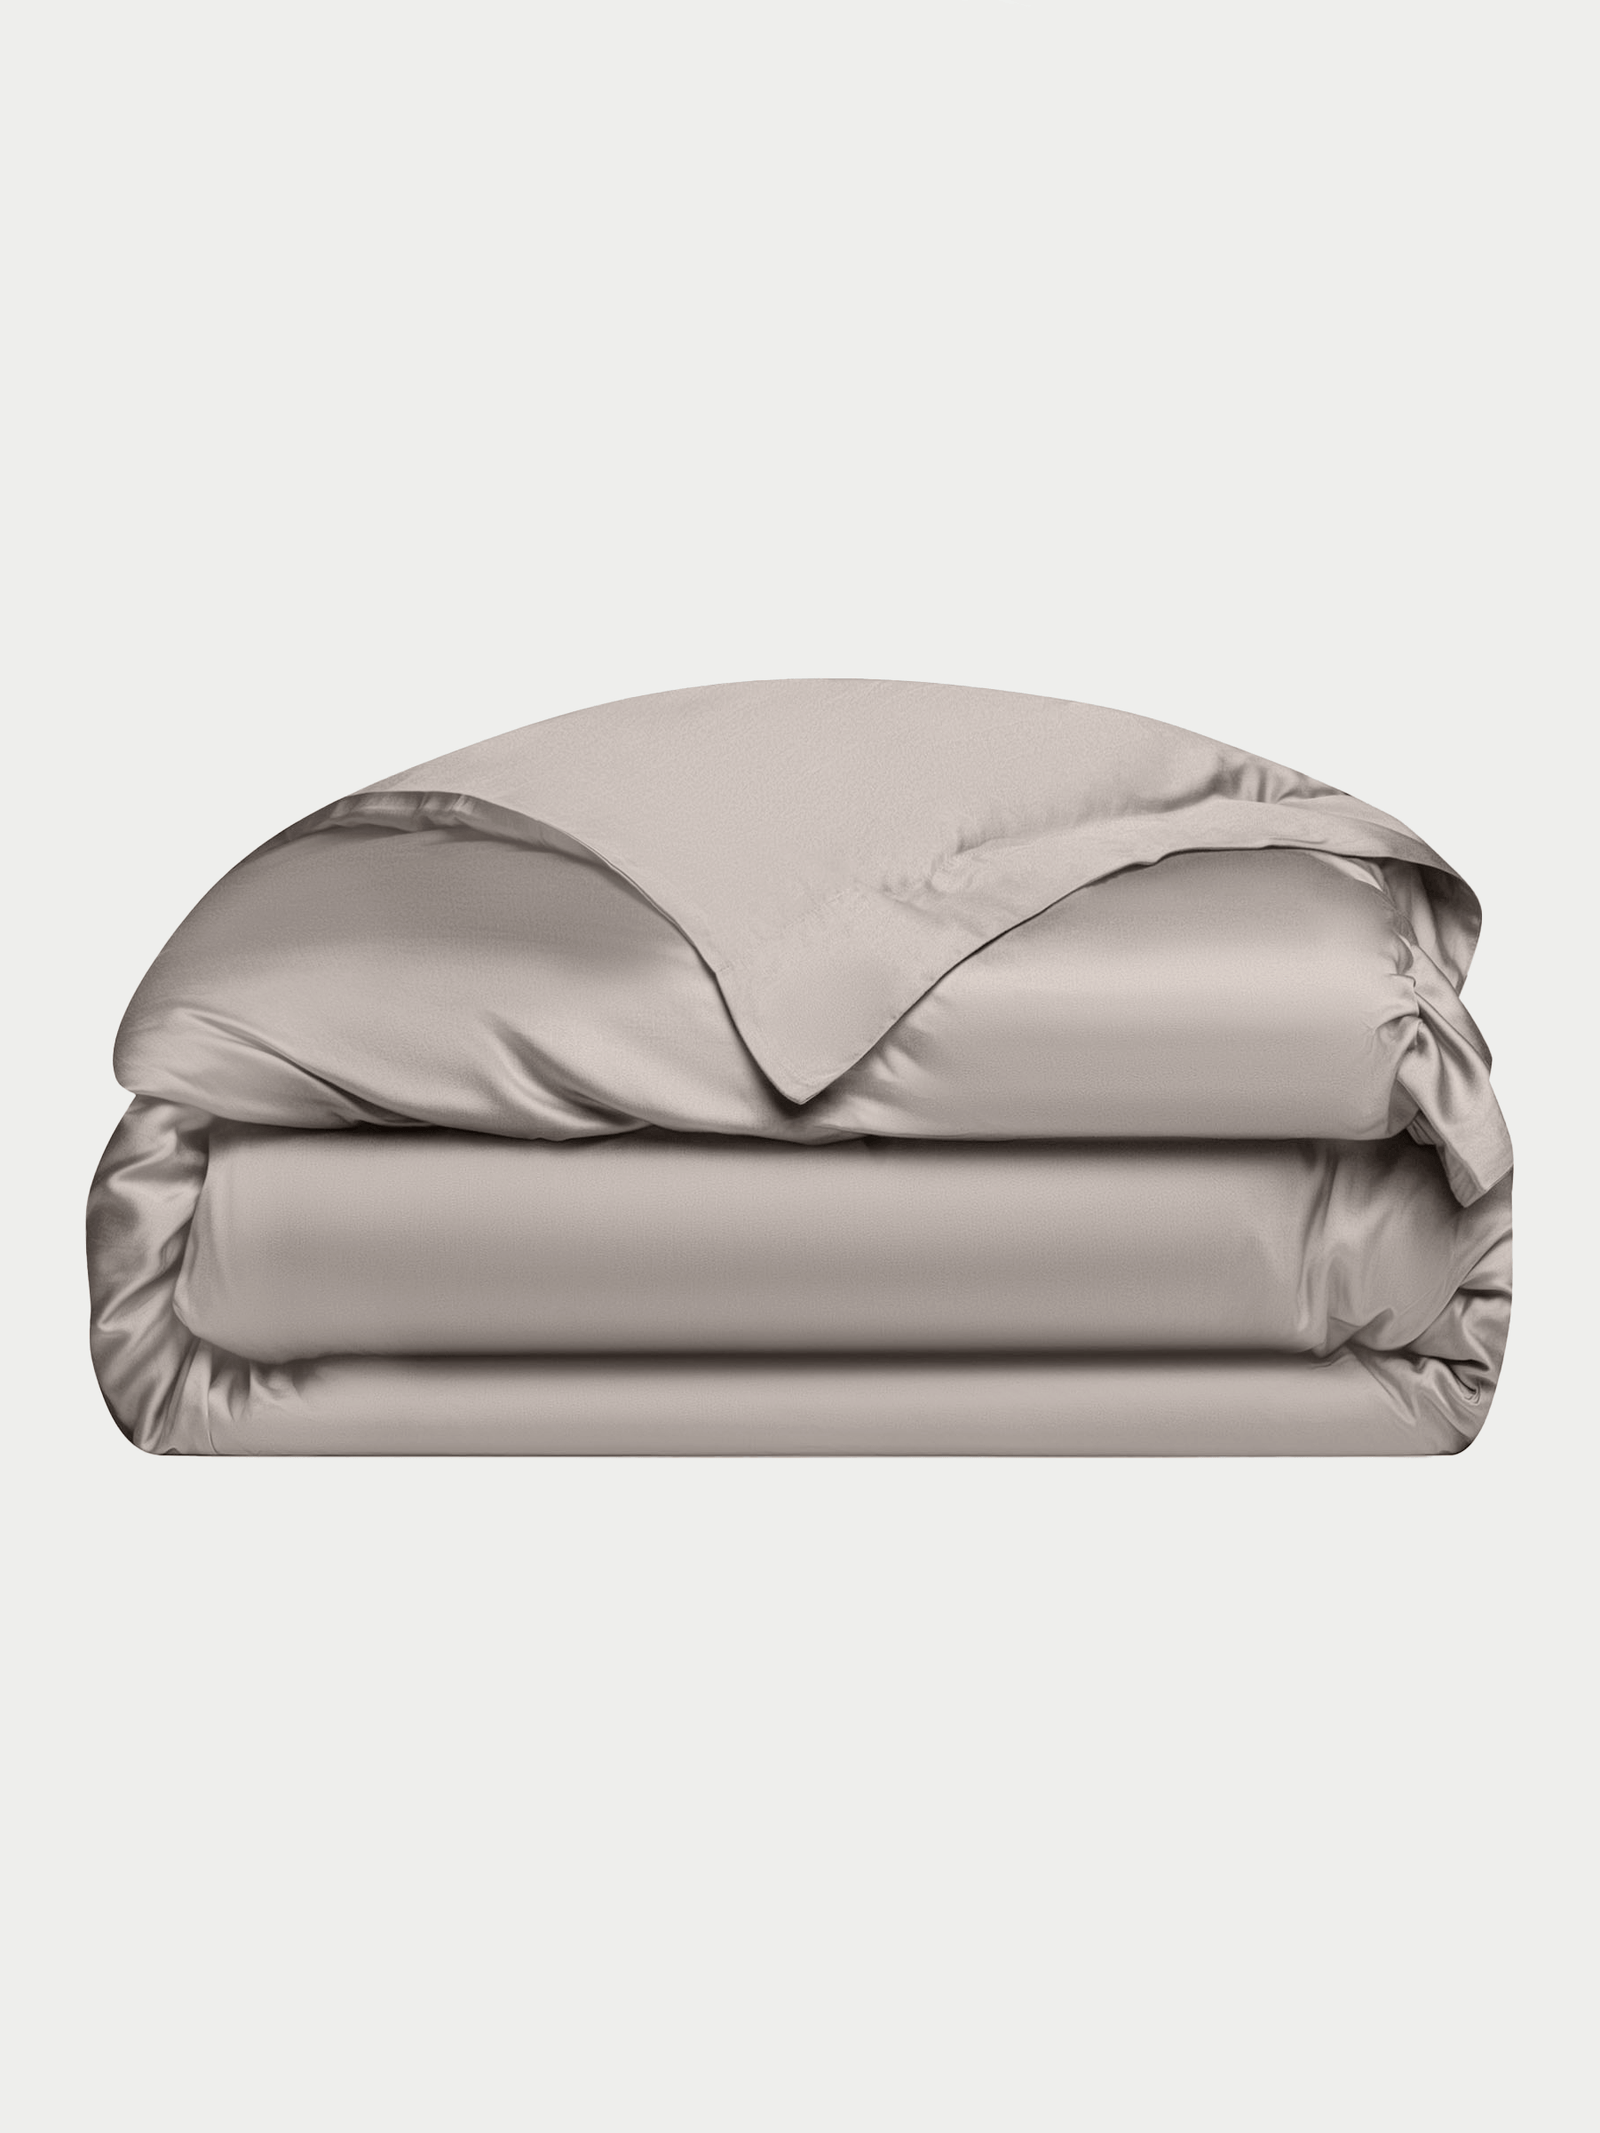 Driftwood duvet cover folded with white background 